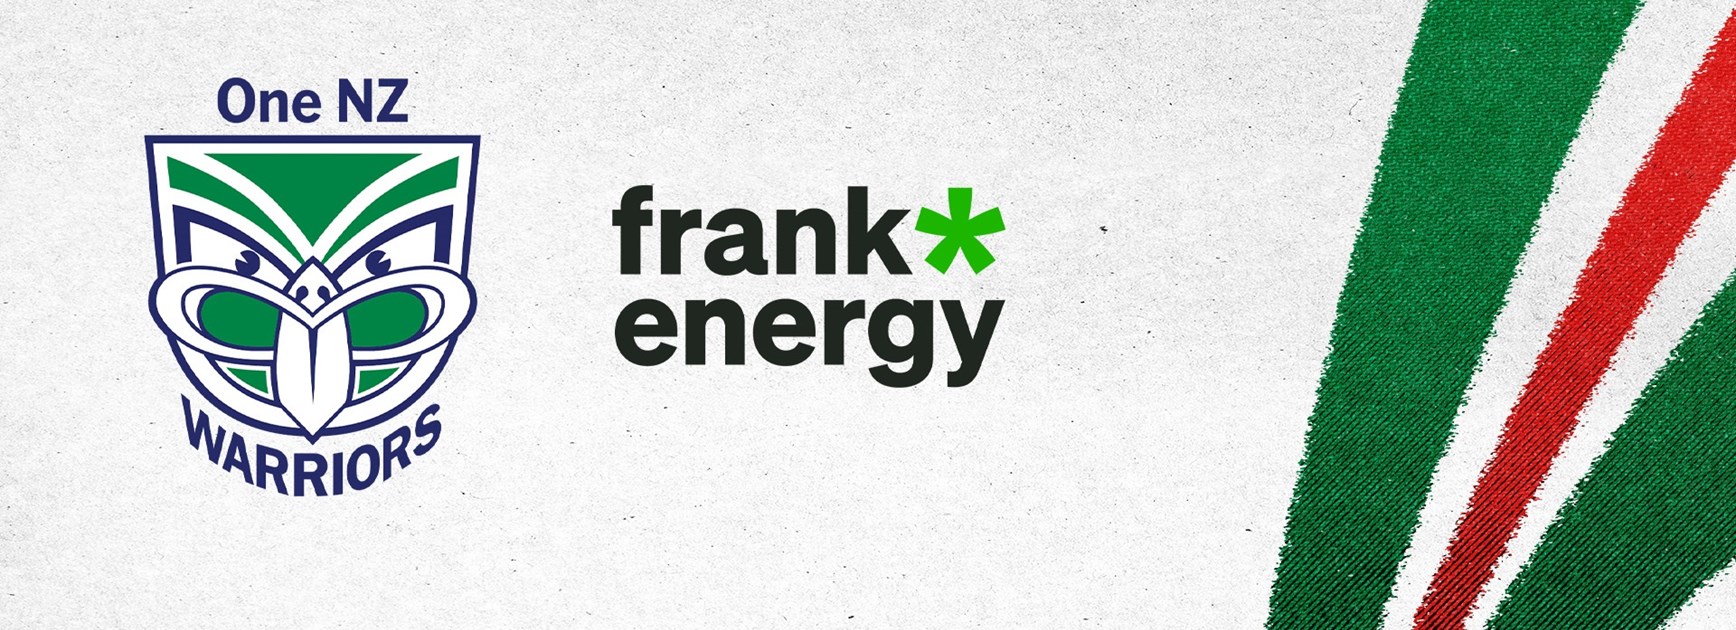 Frank*Energy back onboard as partner for another term